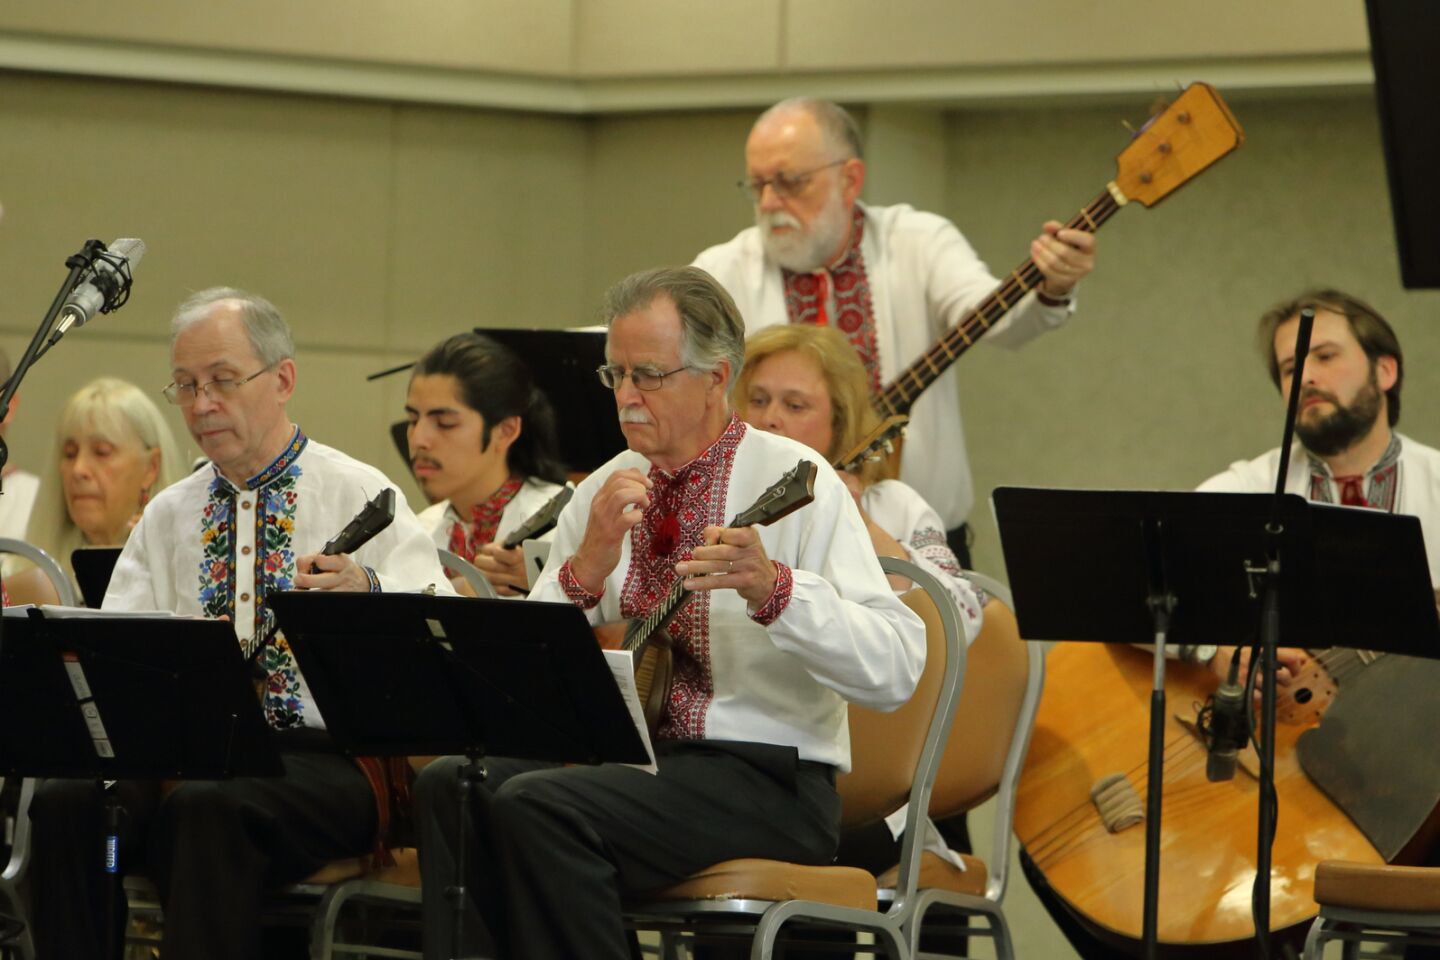 The 25th anniversary concert of the Los Angeles Balalaika Orchestra at the Encinitas Community Center